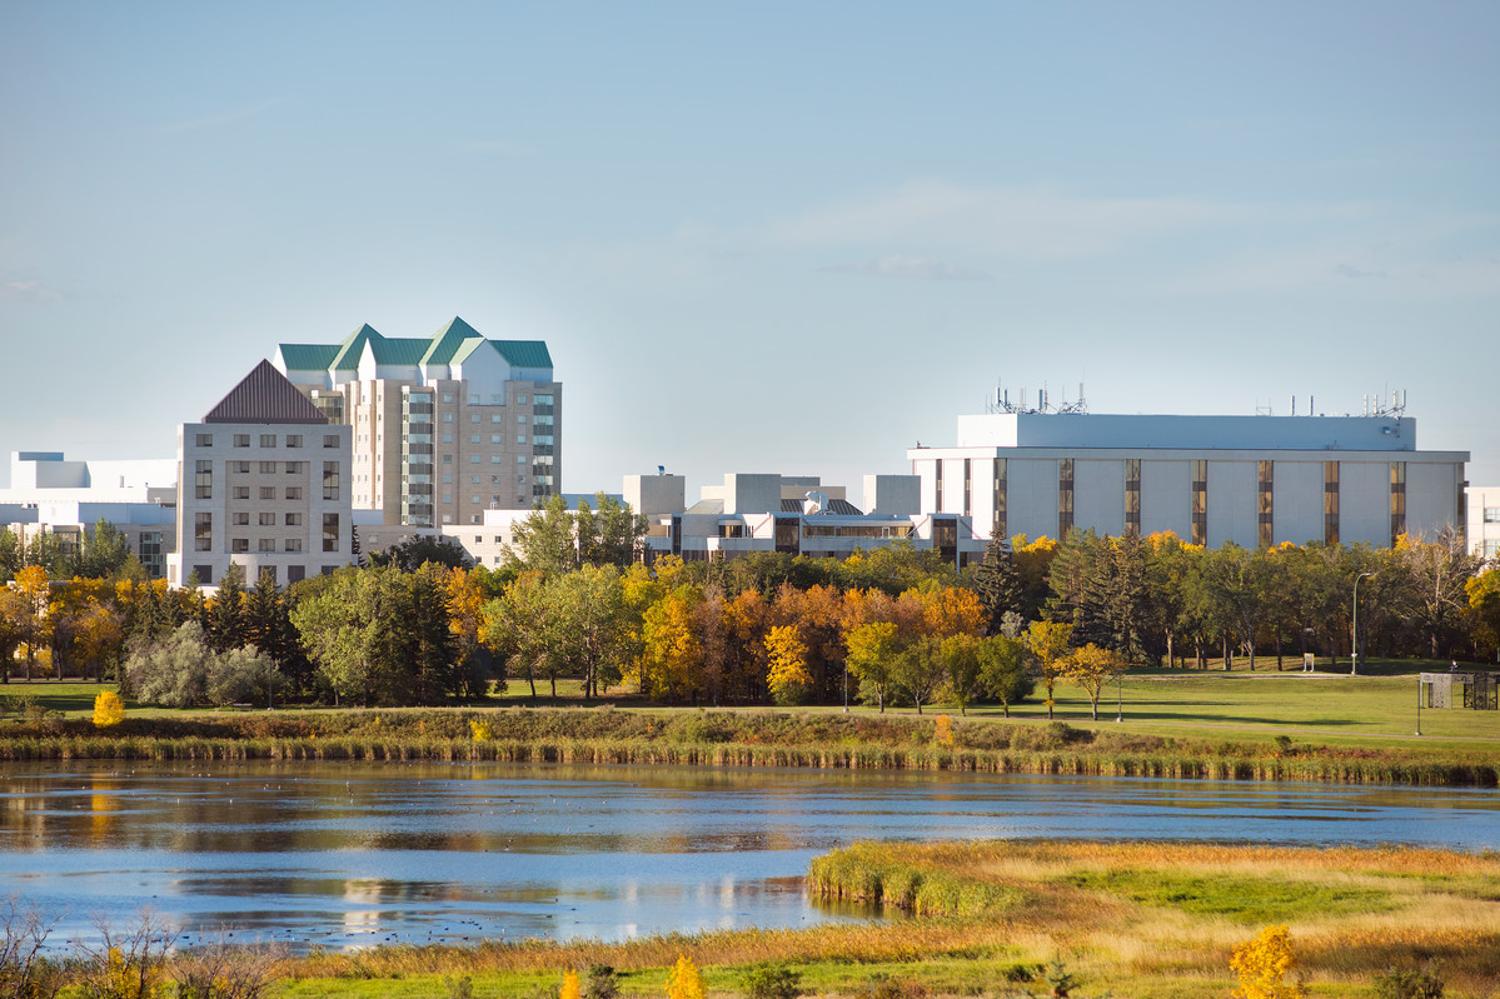 Landscape view of campus from across Wascana Lake